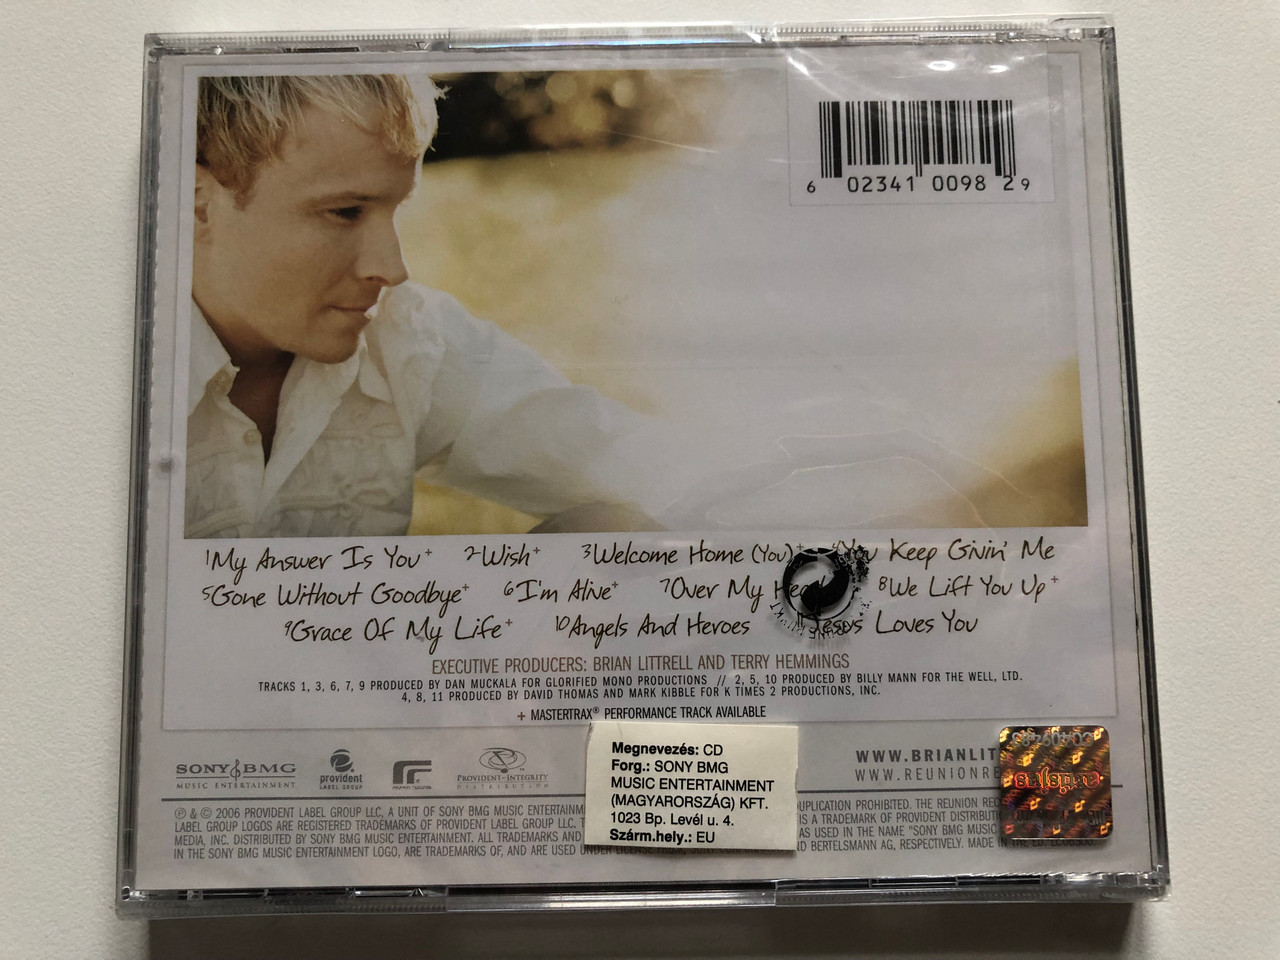 https://cdn10.bigcommerce.com/s-62bdpkt7pb/products/0/images/201877/Brian_Littrell_Welcome_Home_The_Solo_Debut_From_Backstreet_Boys_Brian_Littrell_Includes_Welcome_Home_You_and_My_Answer_Is_You_Reunion_Records_Audio_CD_2006_60234100982_2__35915.1639652278.1280.1280.JPG?c=2&_gl=1*4ttyb0*_ga*MjA2NTIxMjE2MC4xNTkwNTEyNTMy*_ga_WS2VZYPC6G*MTYzOTY0NjQ1OC4yMTkuMS4xNjM5NjUyMDc0LjUx